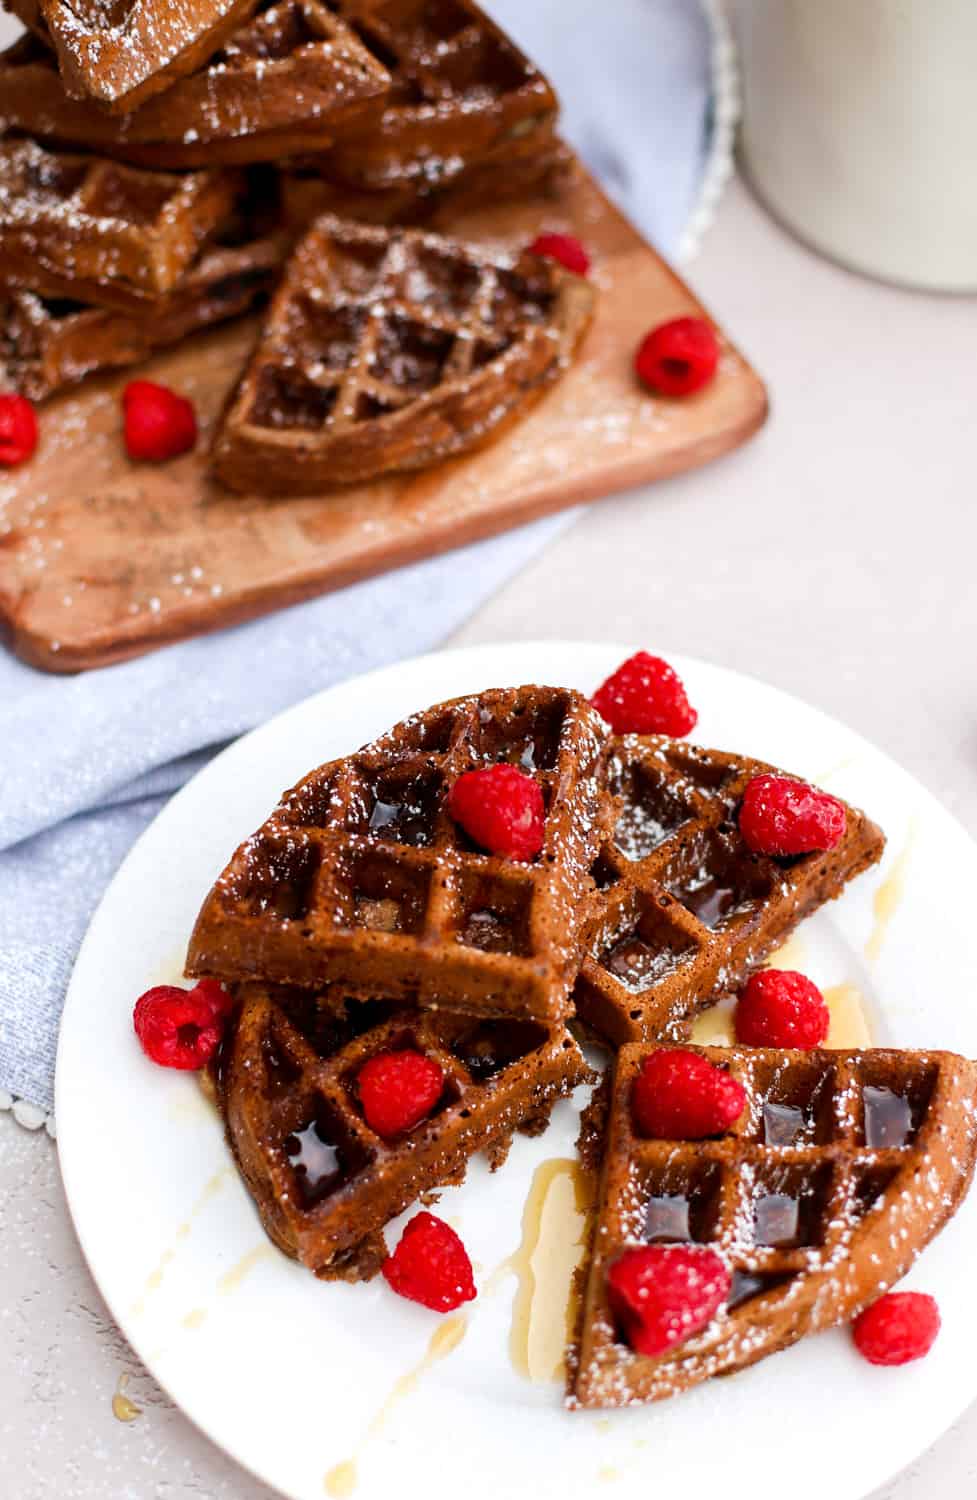 Chocolate waffles and raspberries on a white plate with syrup poured over them.